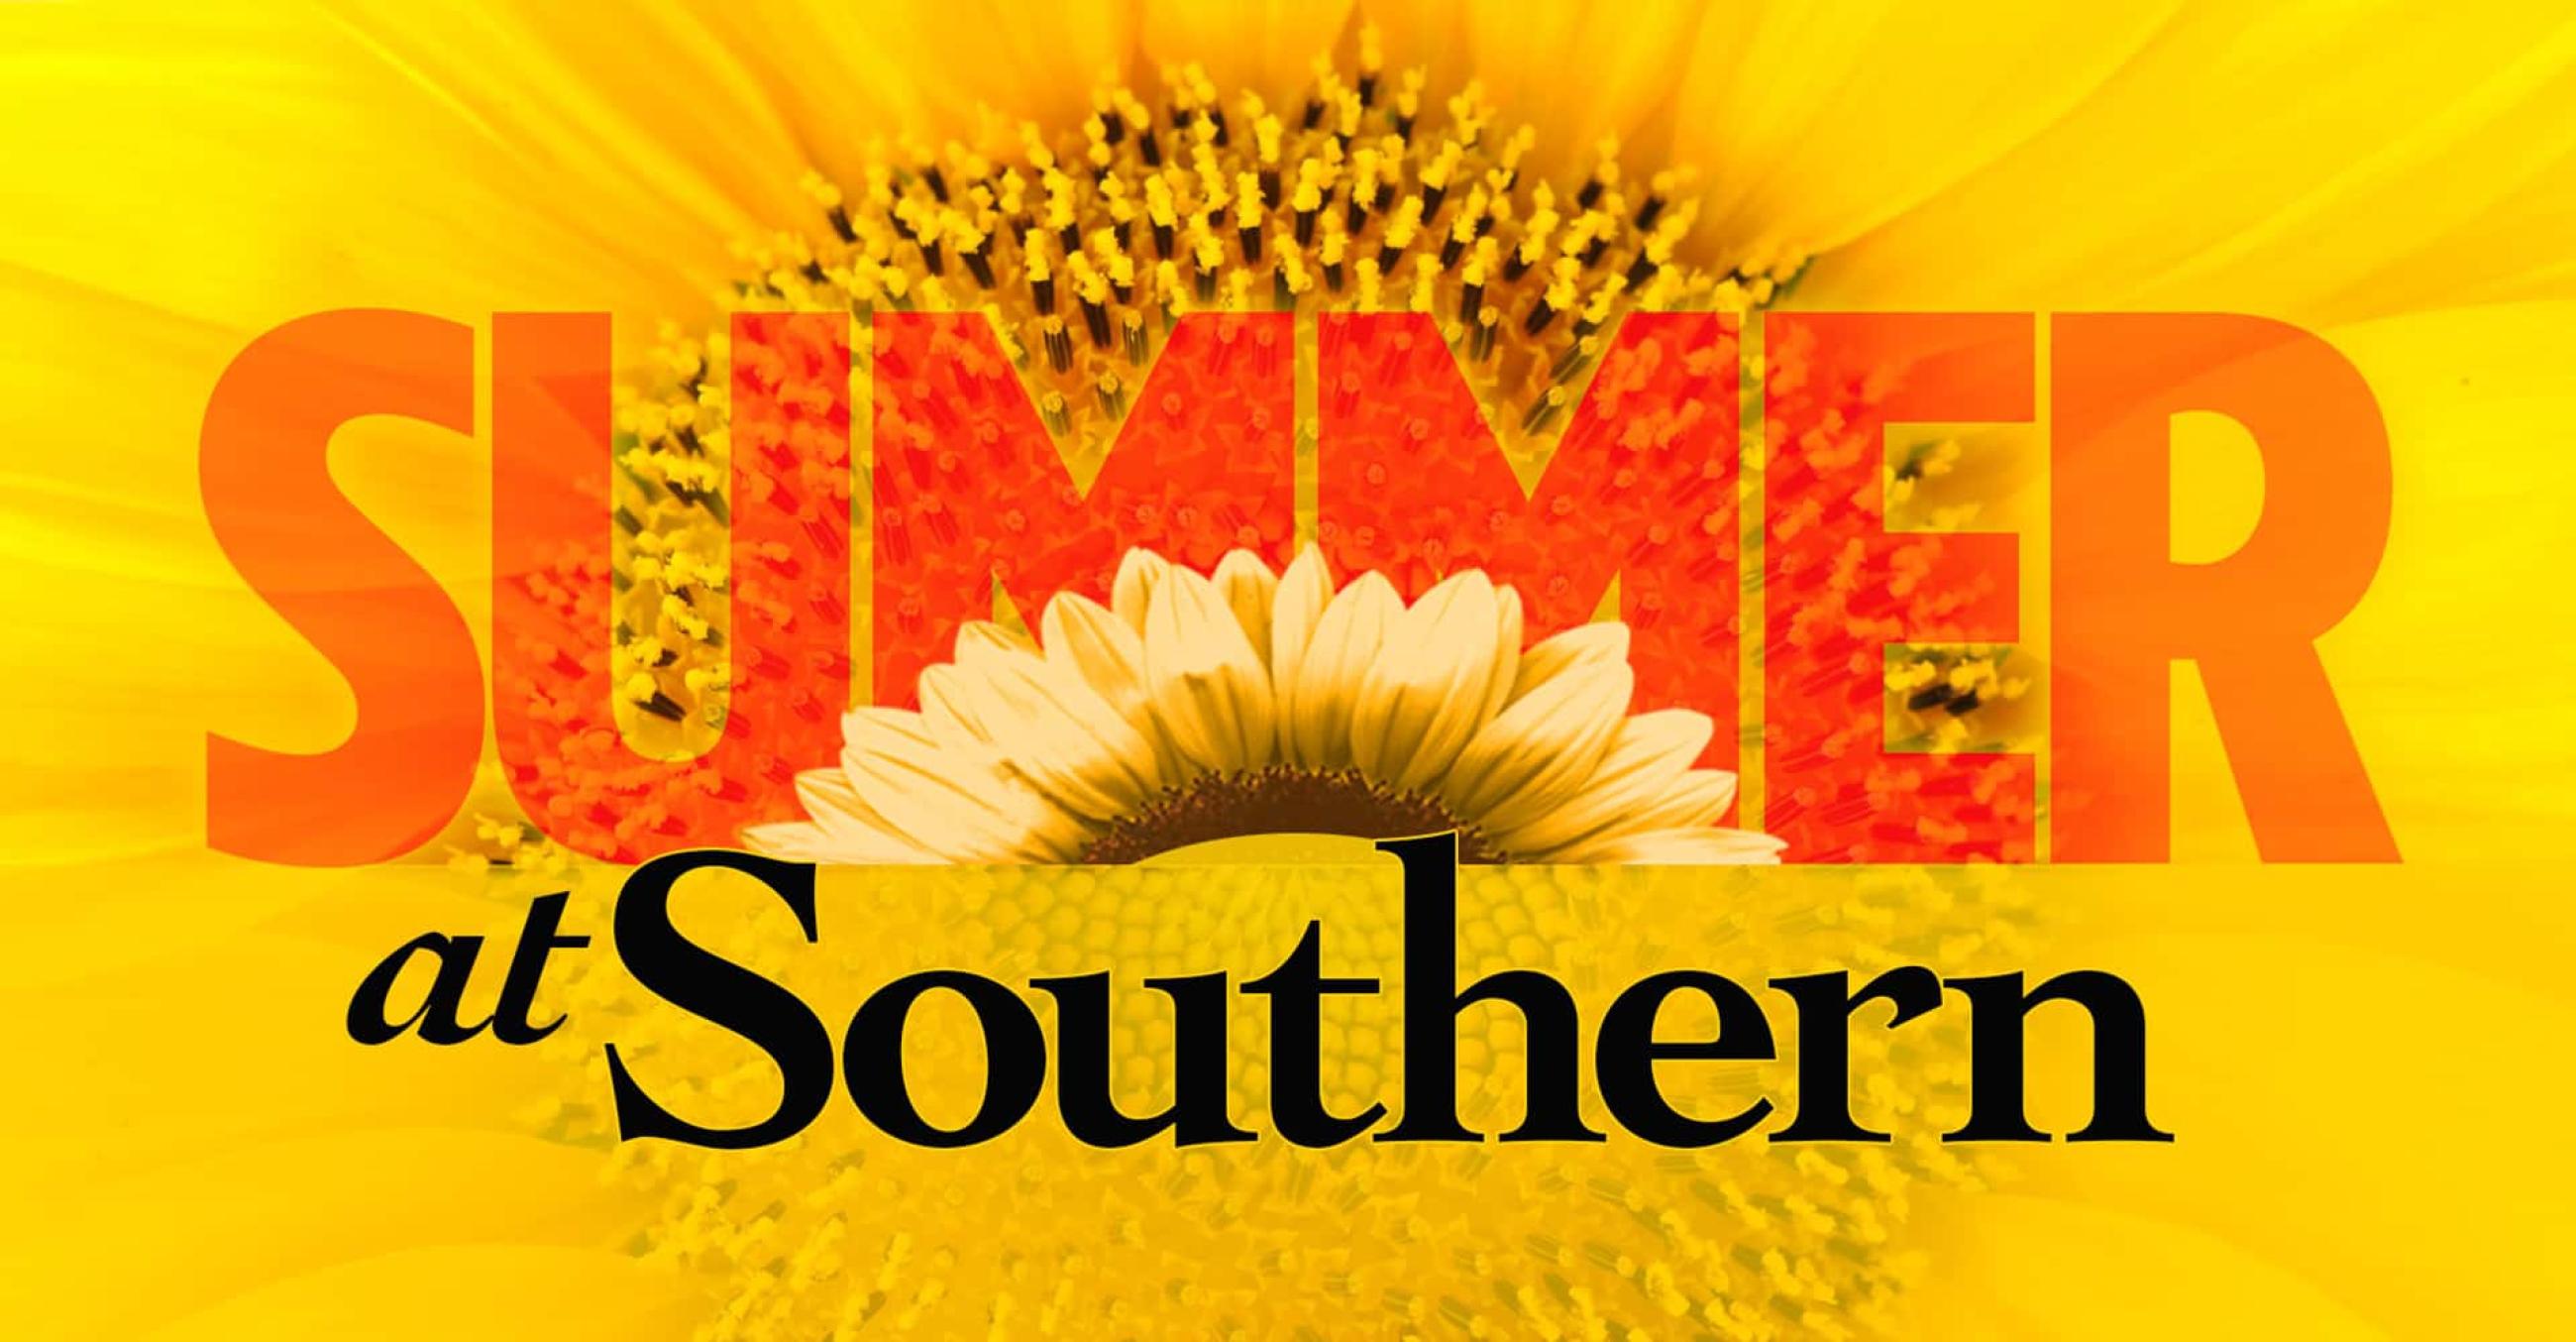 summer session at Southern graphic